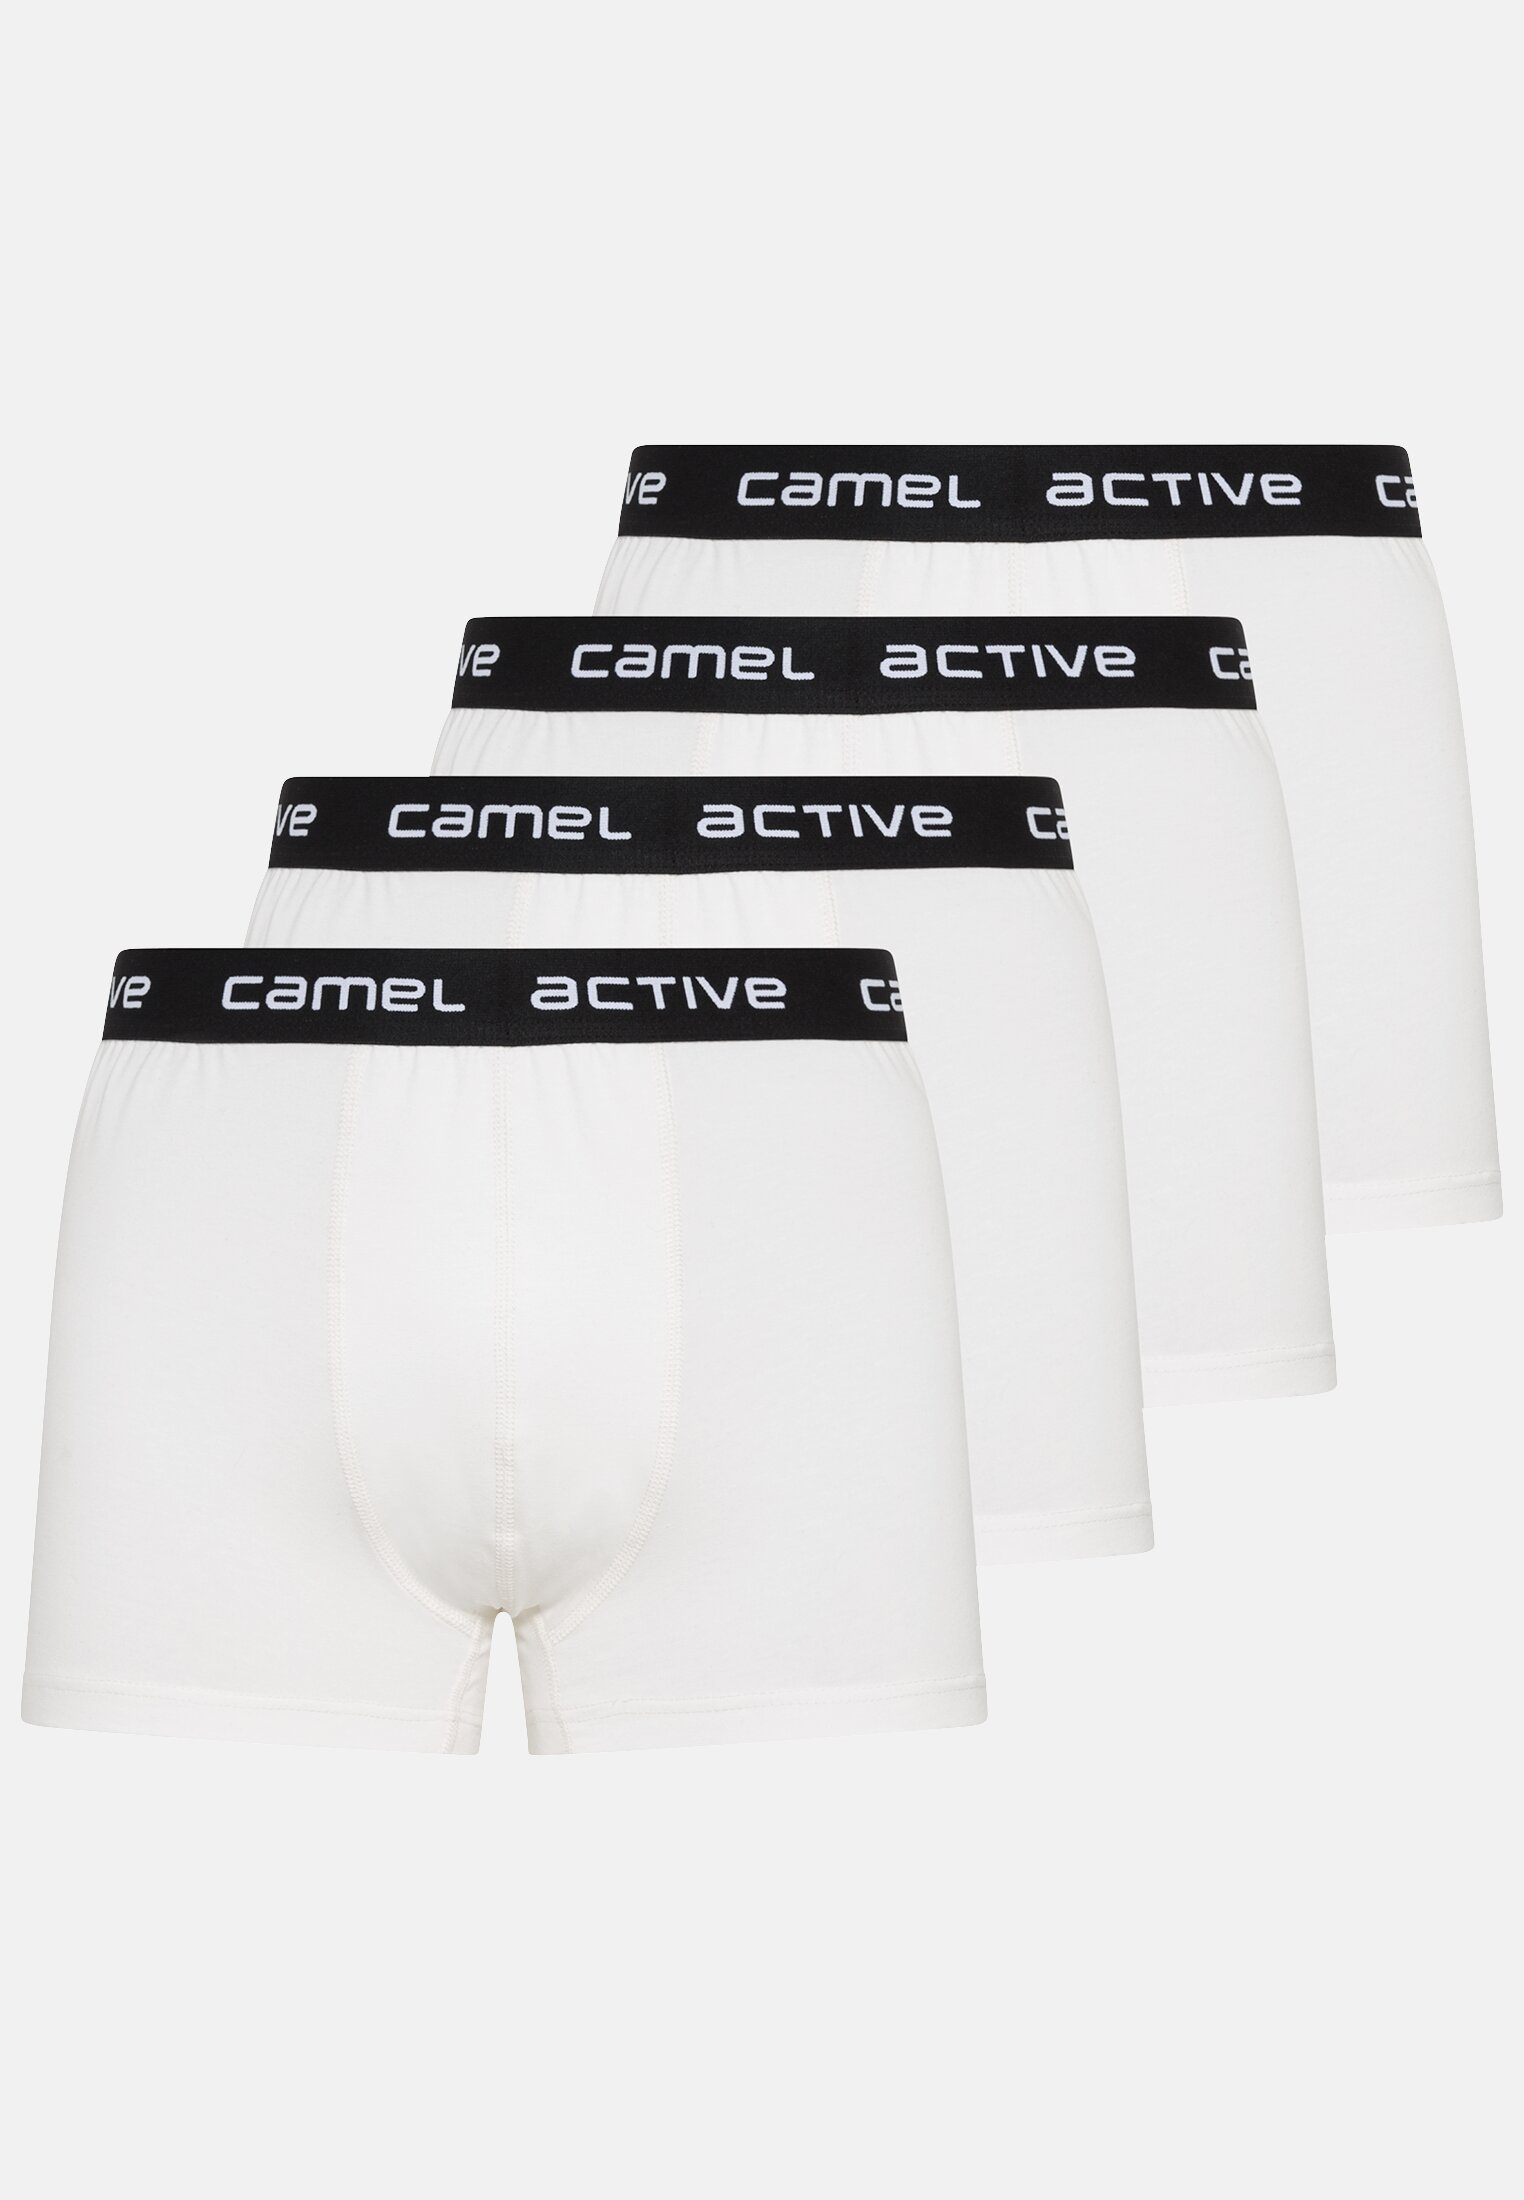 Camel Active Boxer shorts in a set of 4